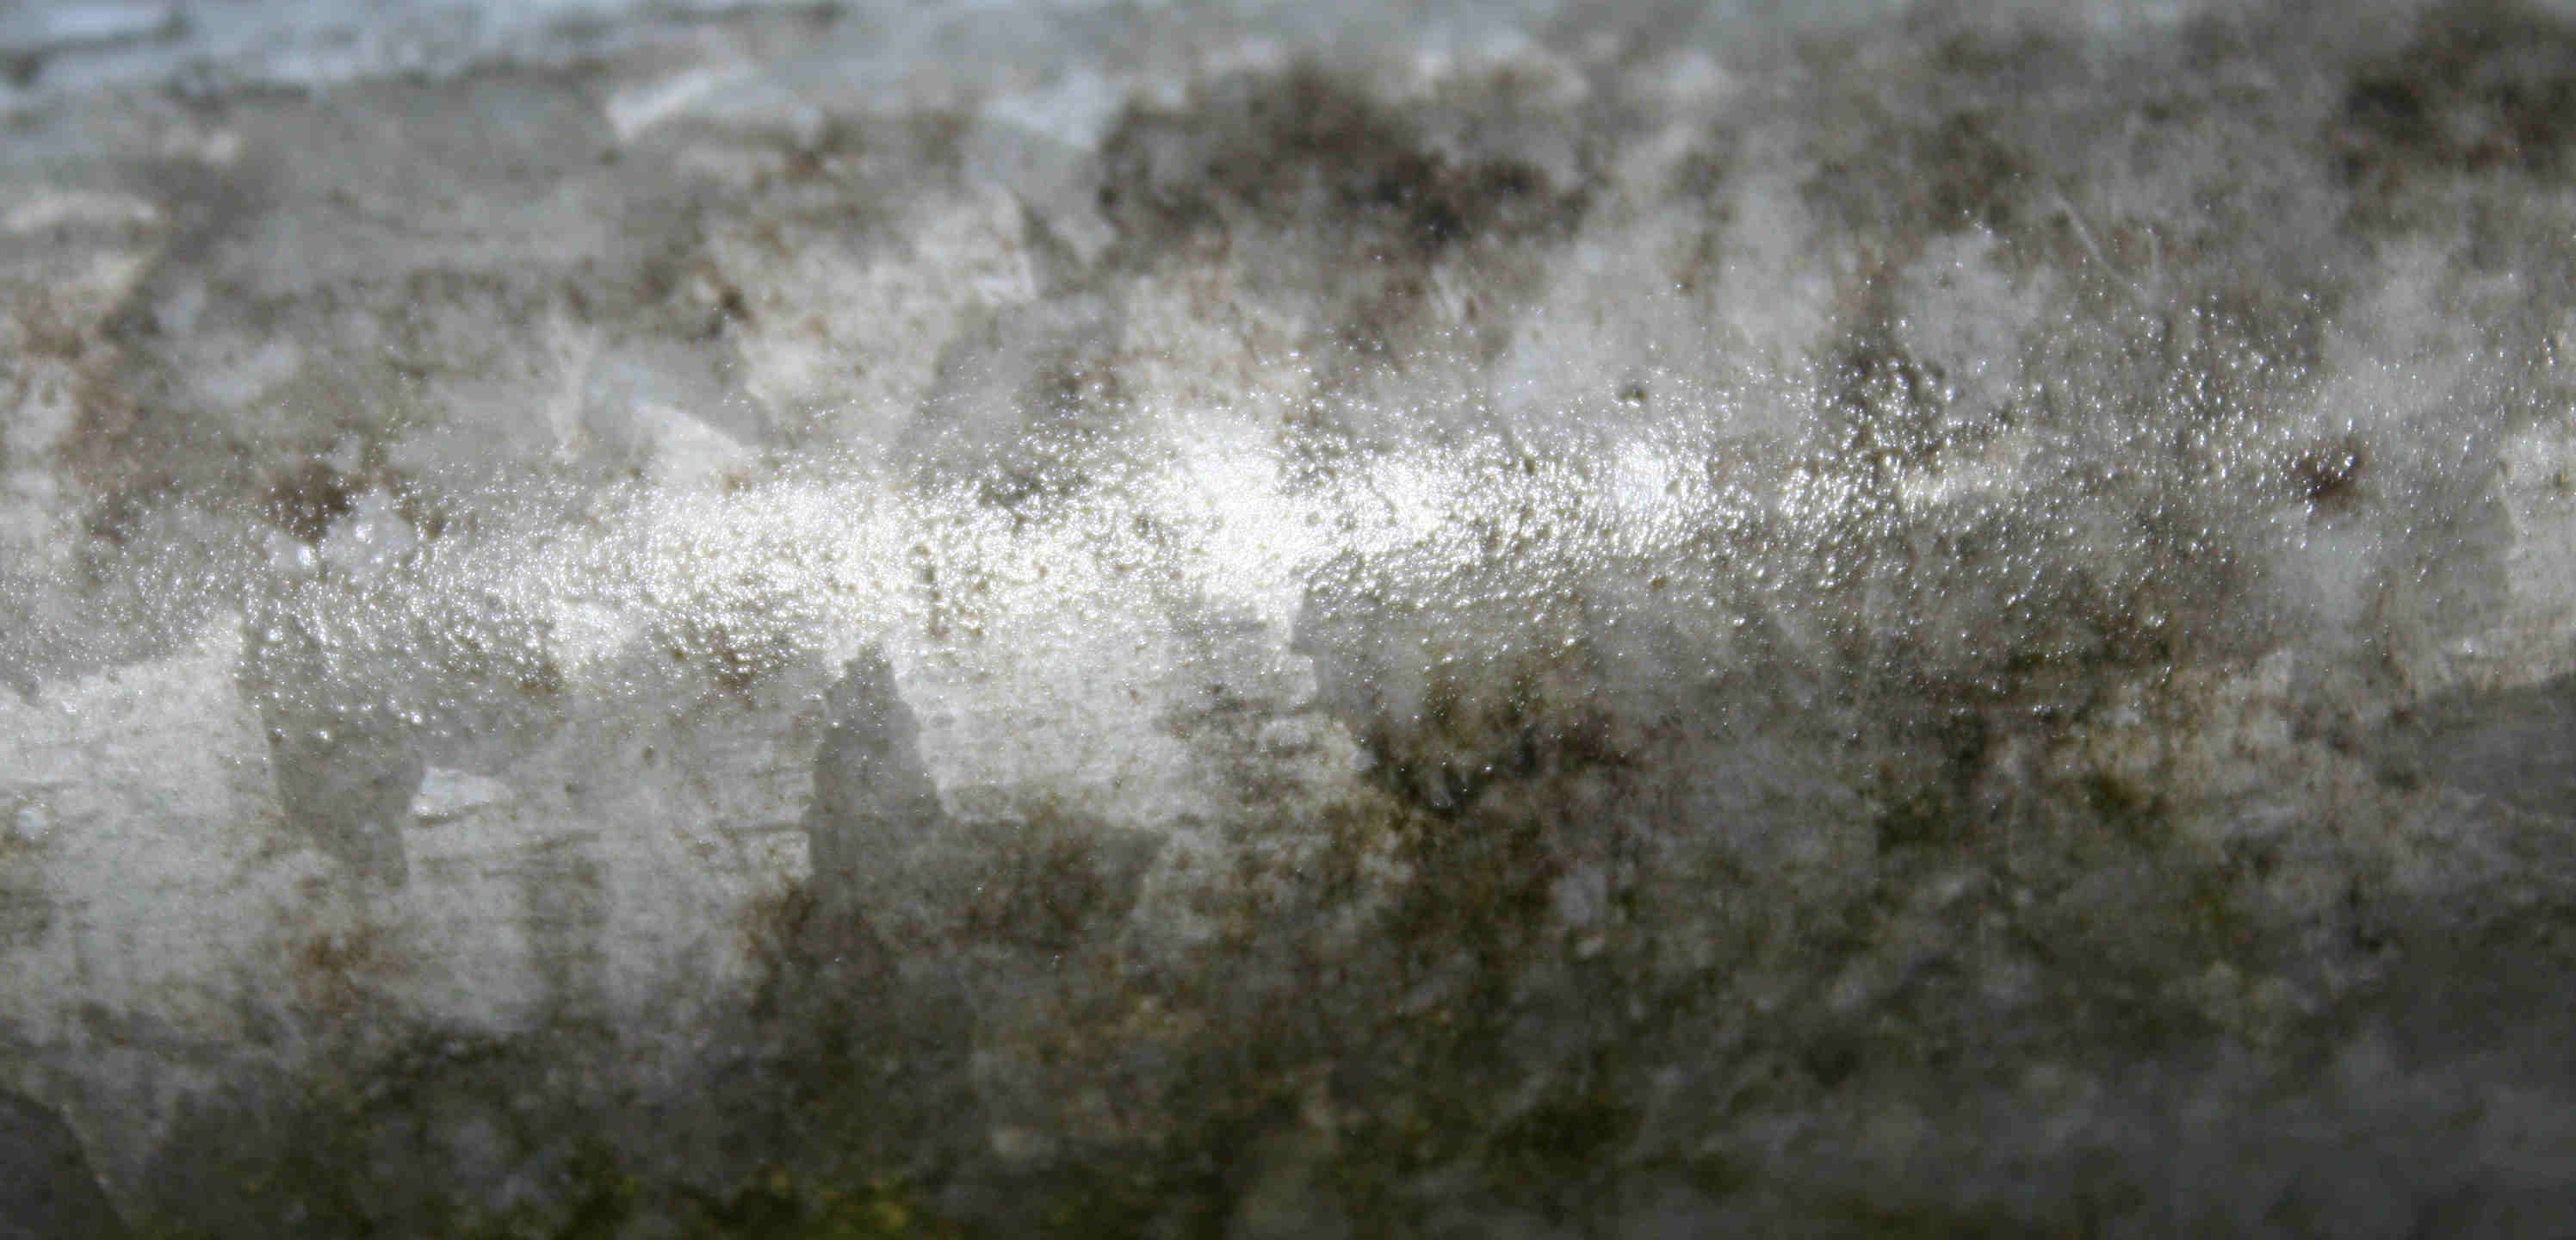 20 Distressed Wallpapers Images Pictures Freecreatives HD Wallpapers Download Free Map Images Wallpaper [wallpaper376.blogspot.com]